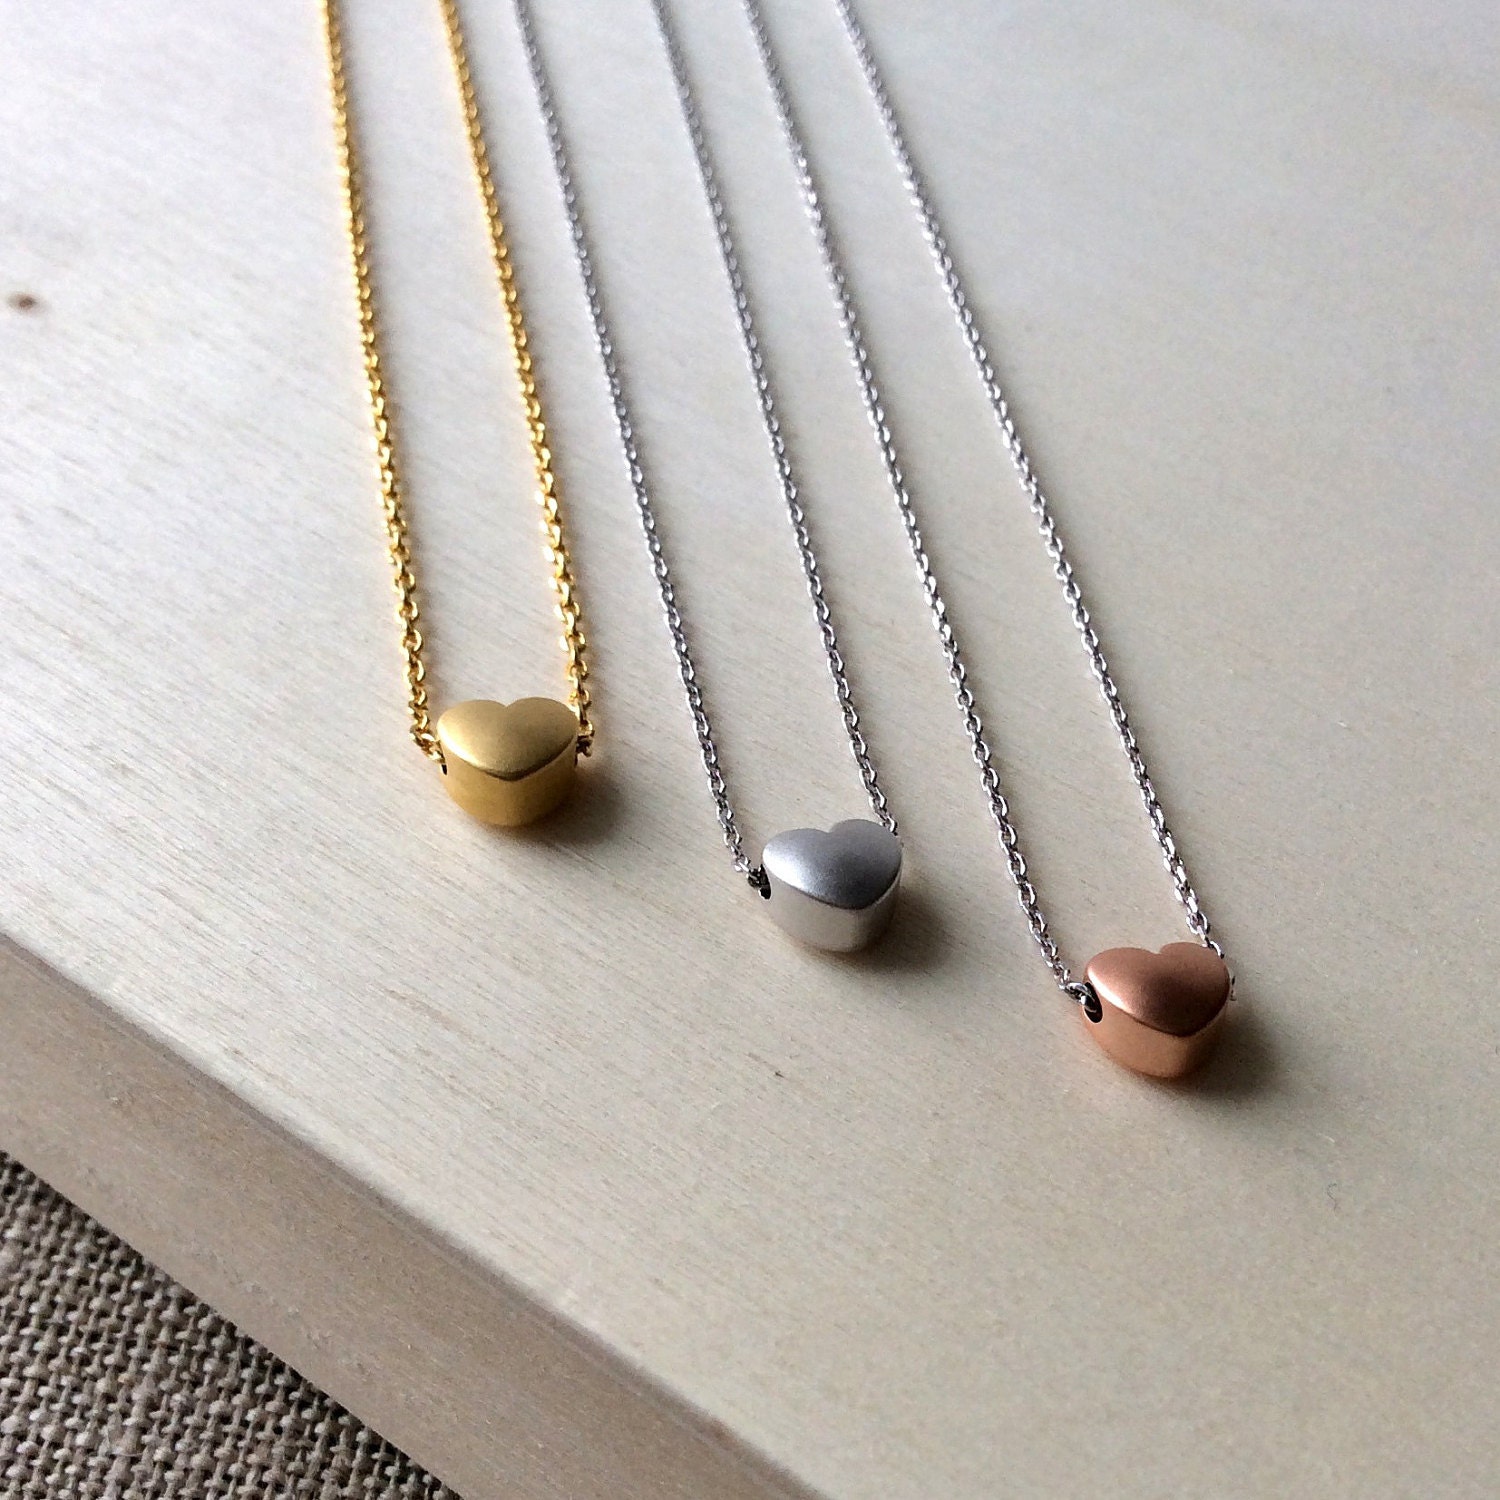 Mini Puffed Heart Charm Necklace, Matte silver necklace, heart pendant necklace, Mother's Day gift, matte gold necklace, matte rose gold